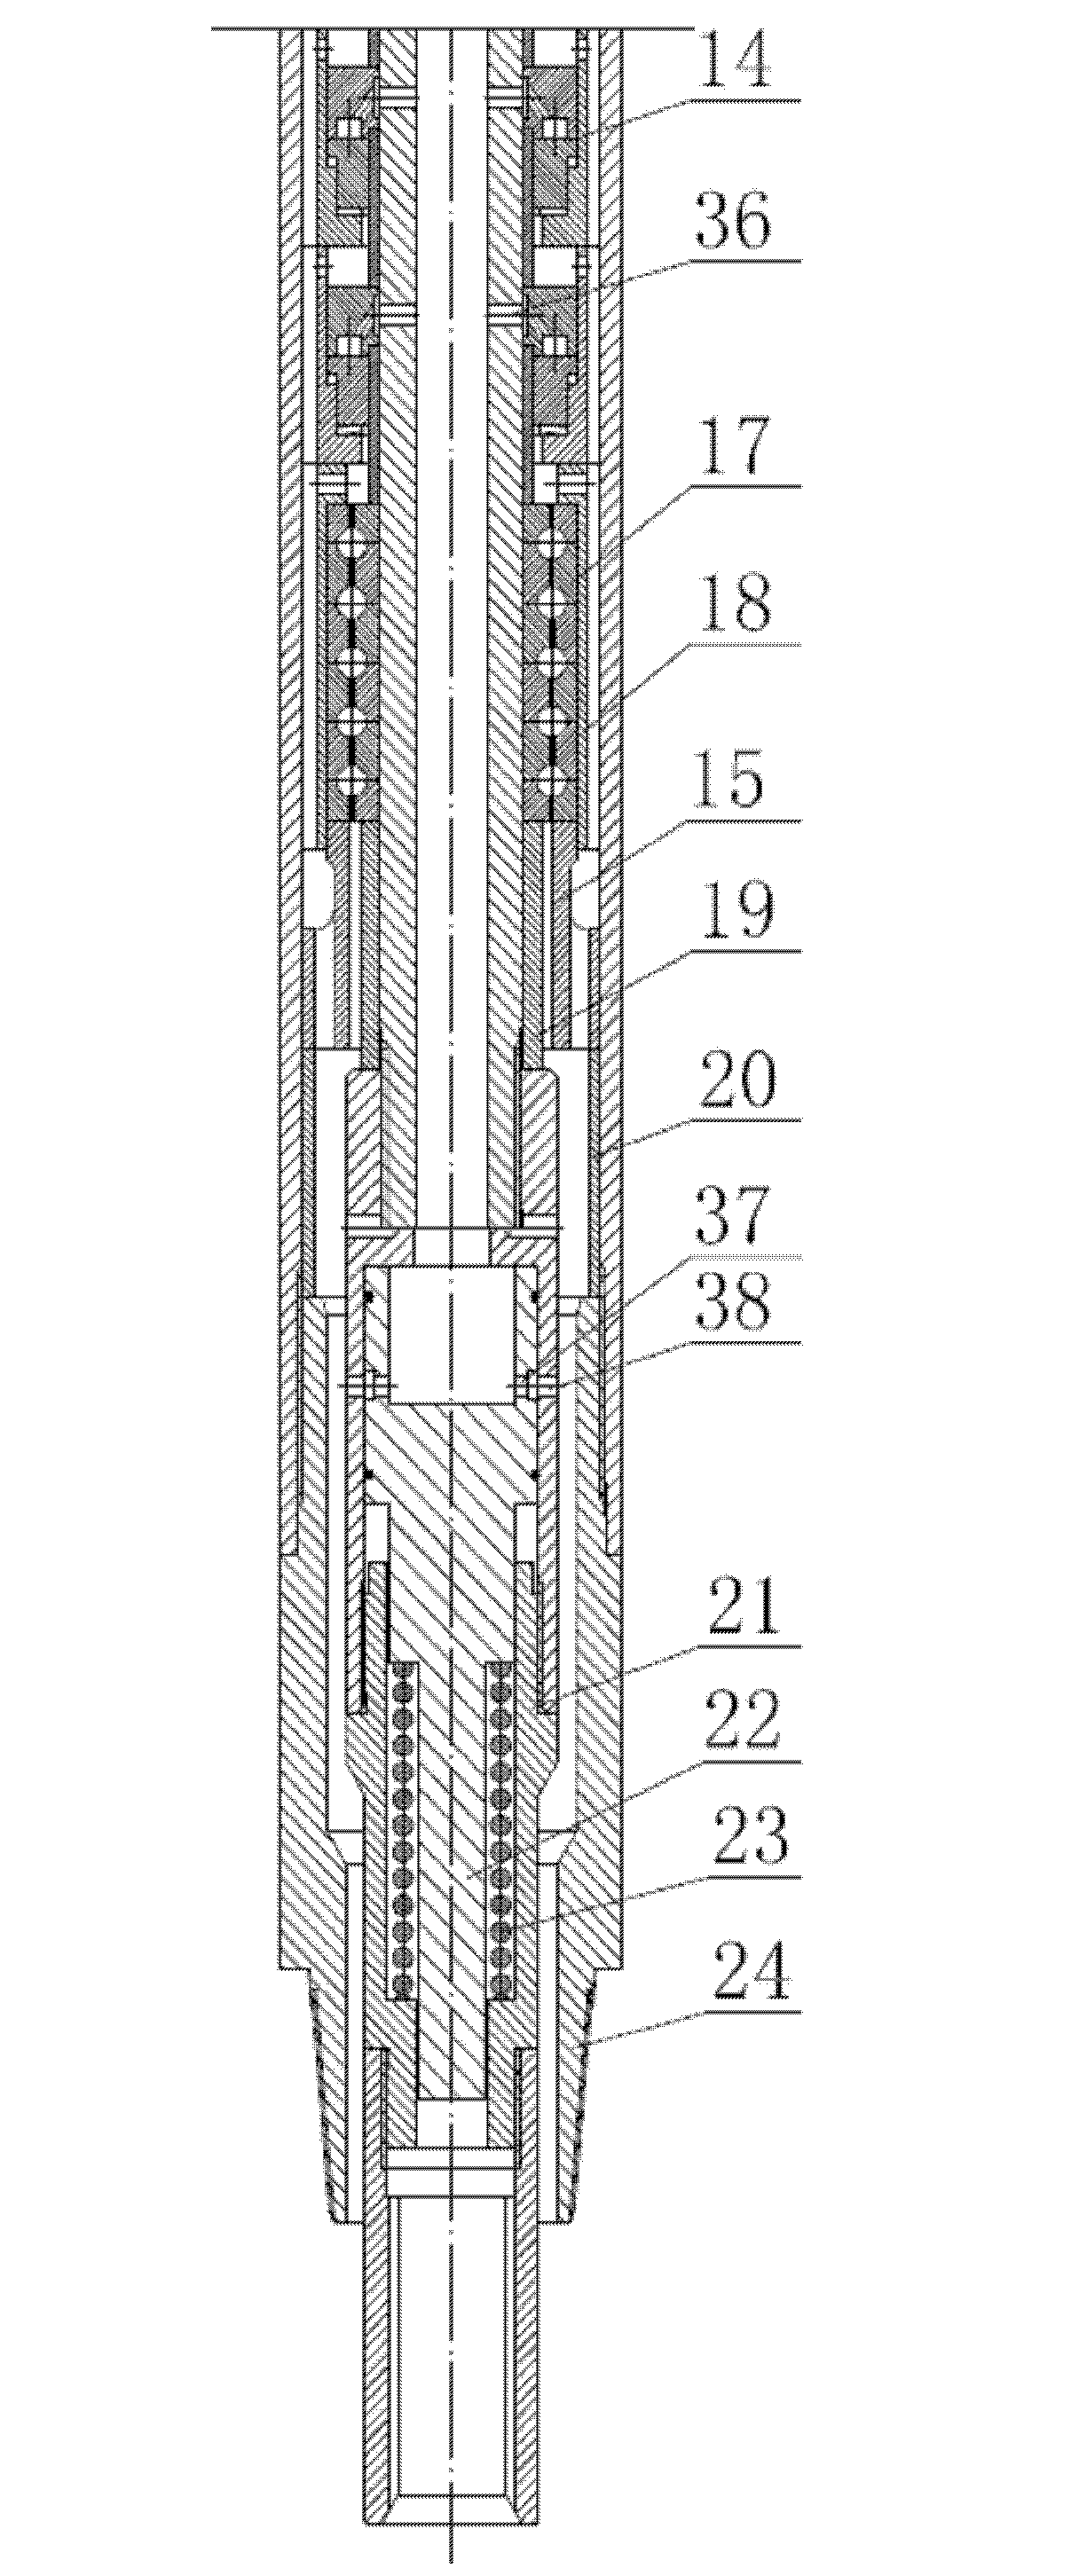 High-speed turbine section for turbine drilling tool